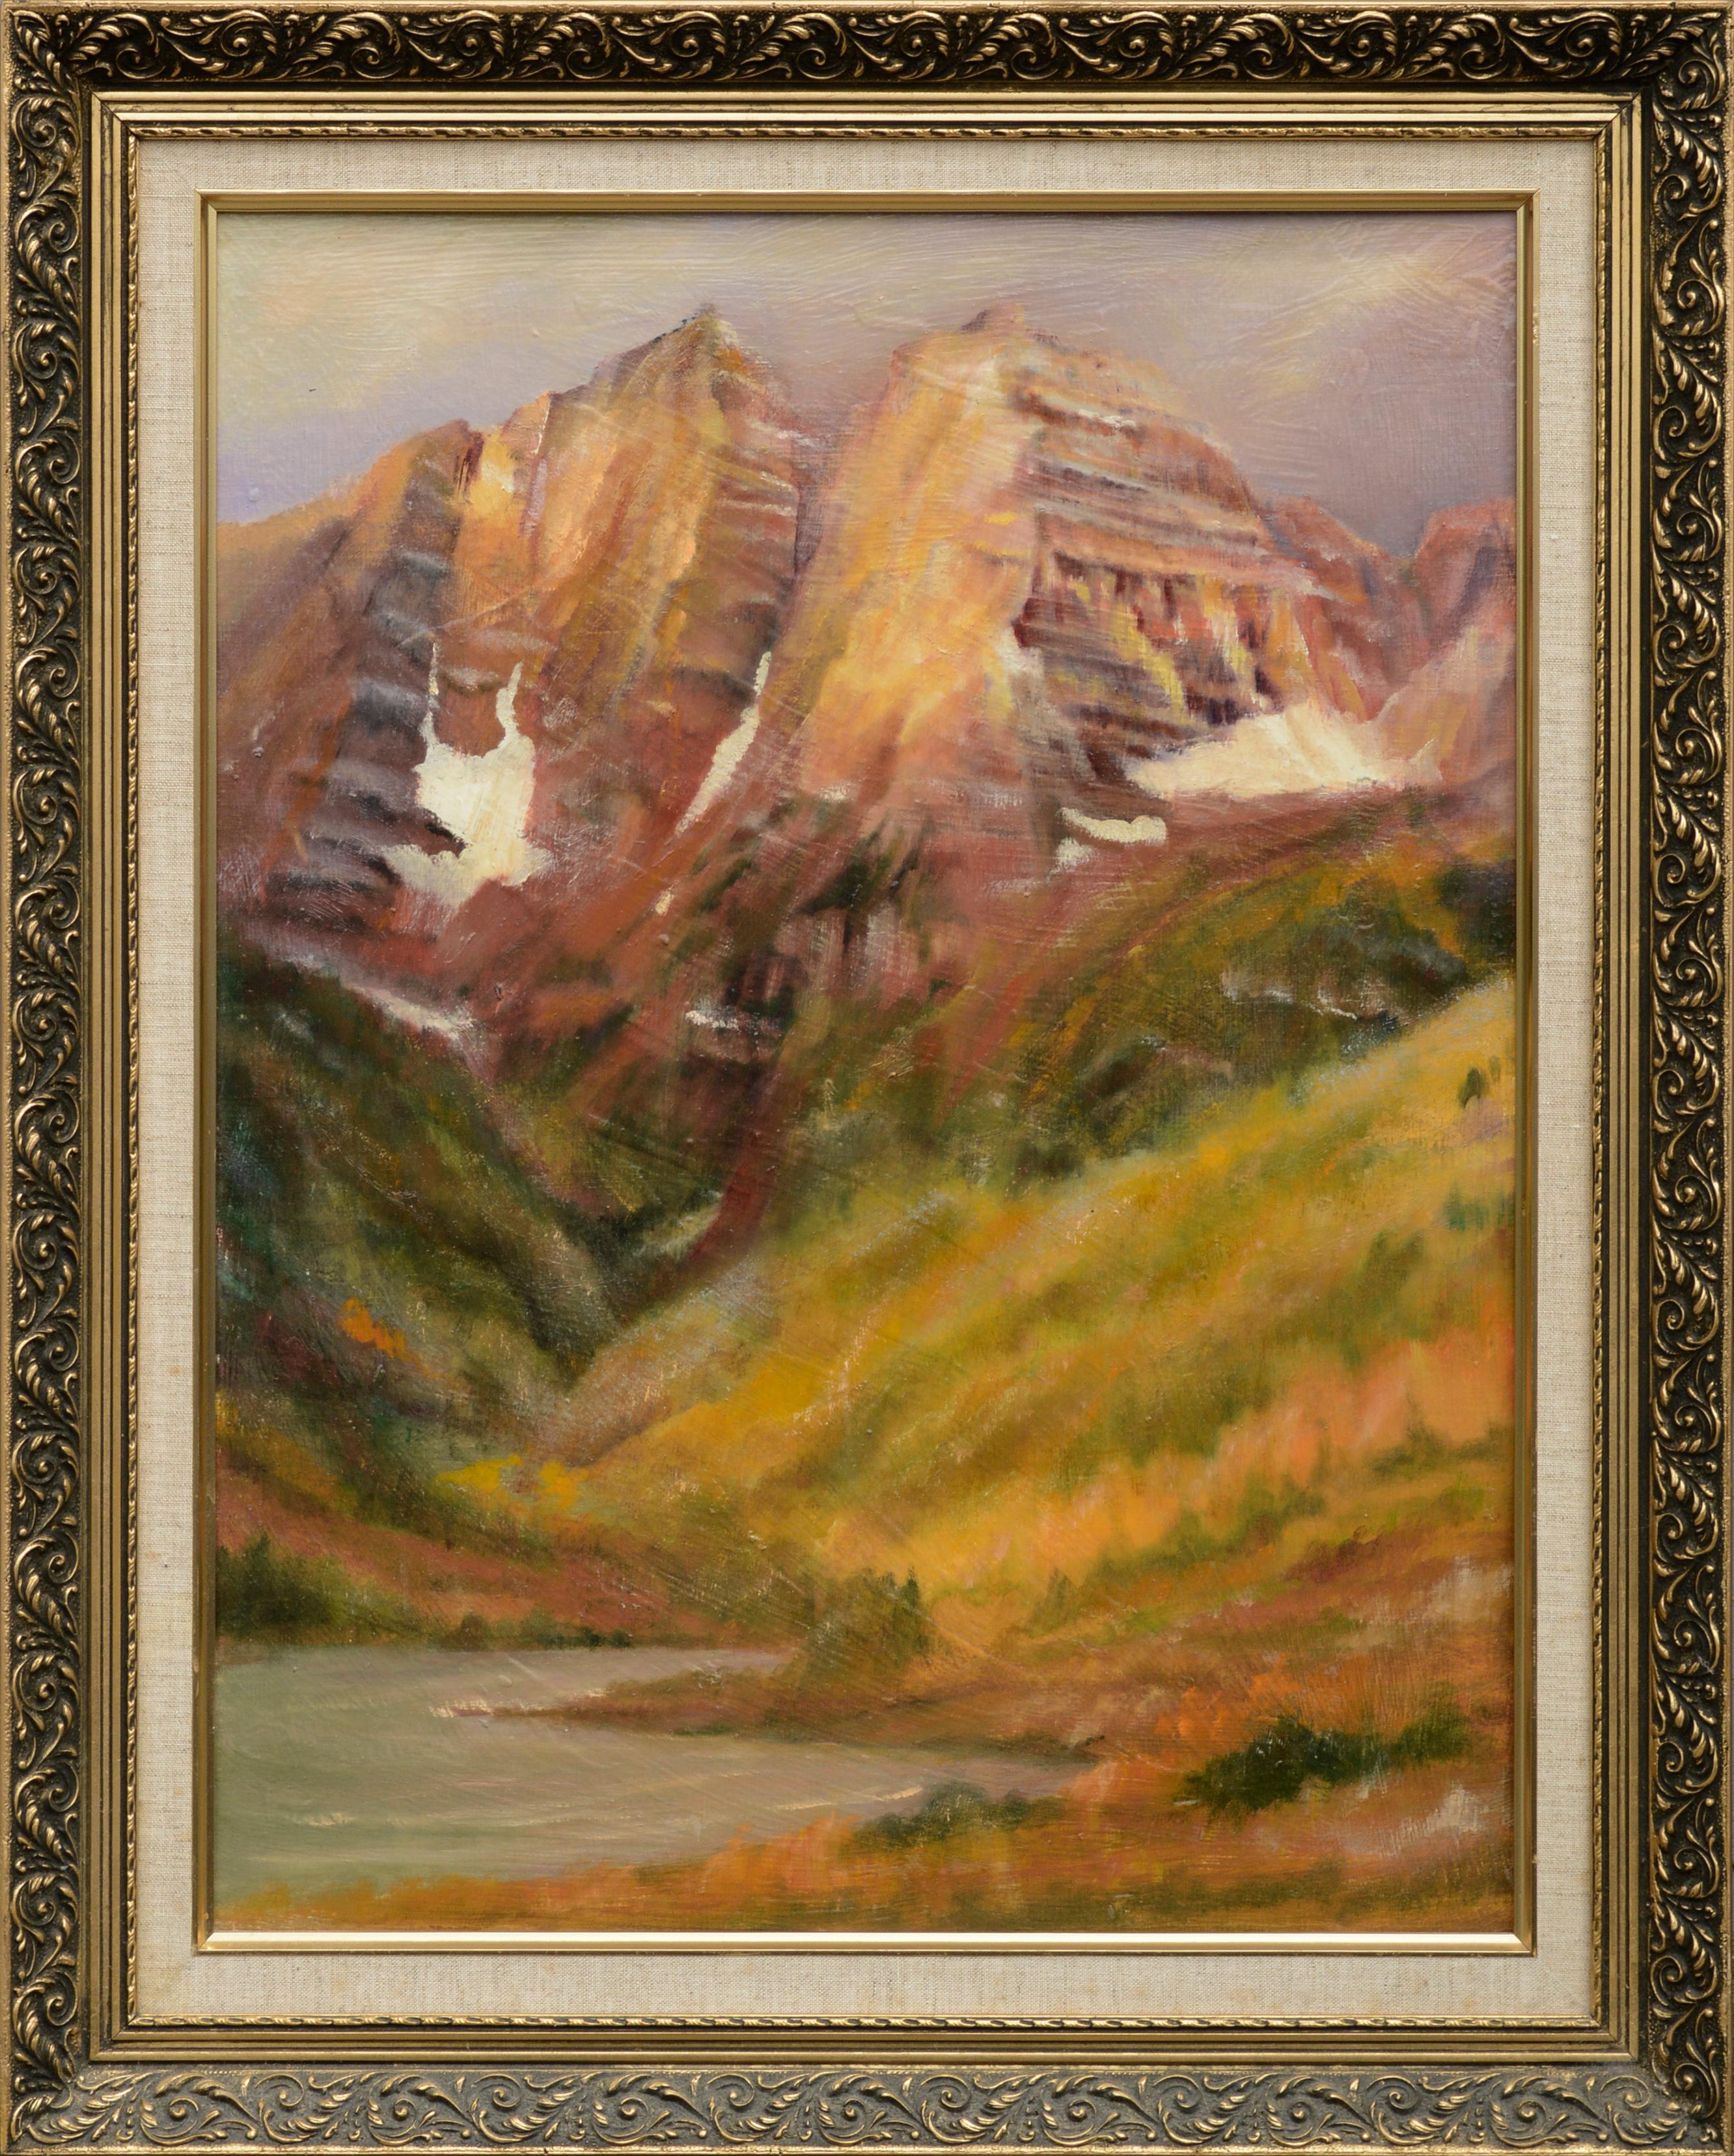 Kenneth Lucas Landscape Painting - Snow Capped Sierra Mountain Valley Lake, Vertical California Winter Landscape